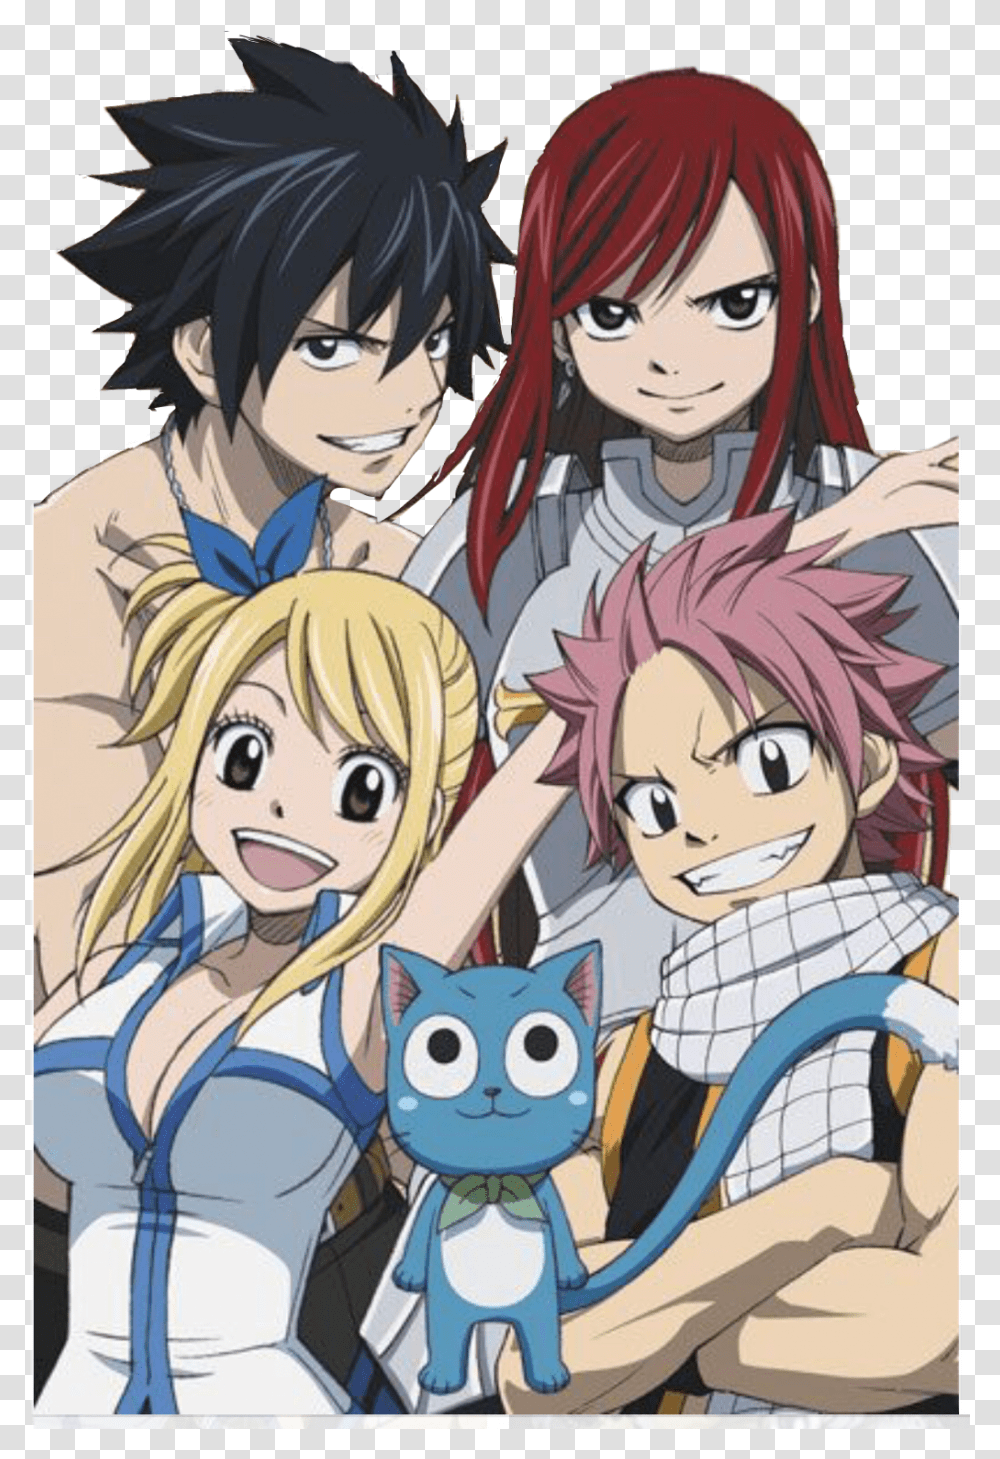 Fairytail Natsu Lucy Happy Gray Erza Freetoedit Fairy Tail Natsu Lucy Gray Erza, Manga, Comics, Book, Person Transparent Png